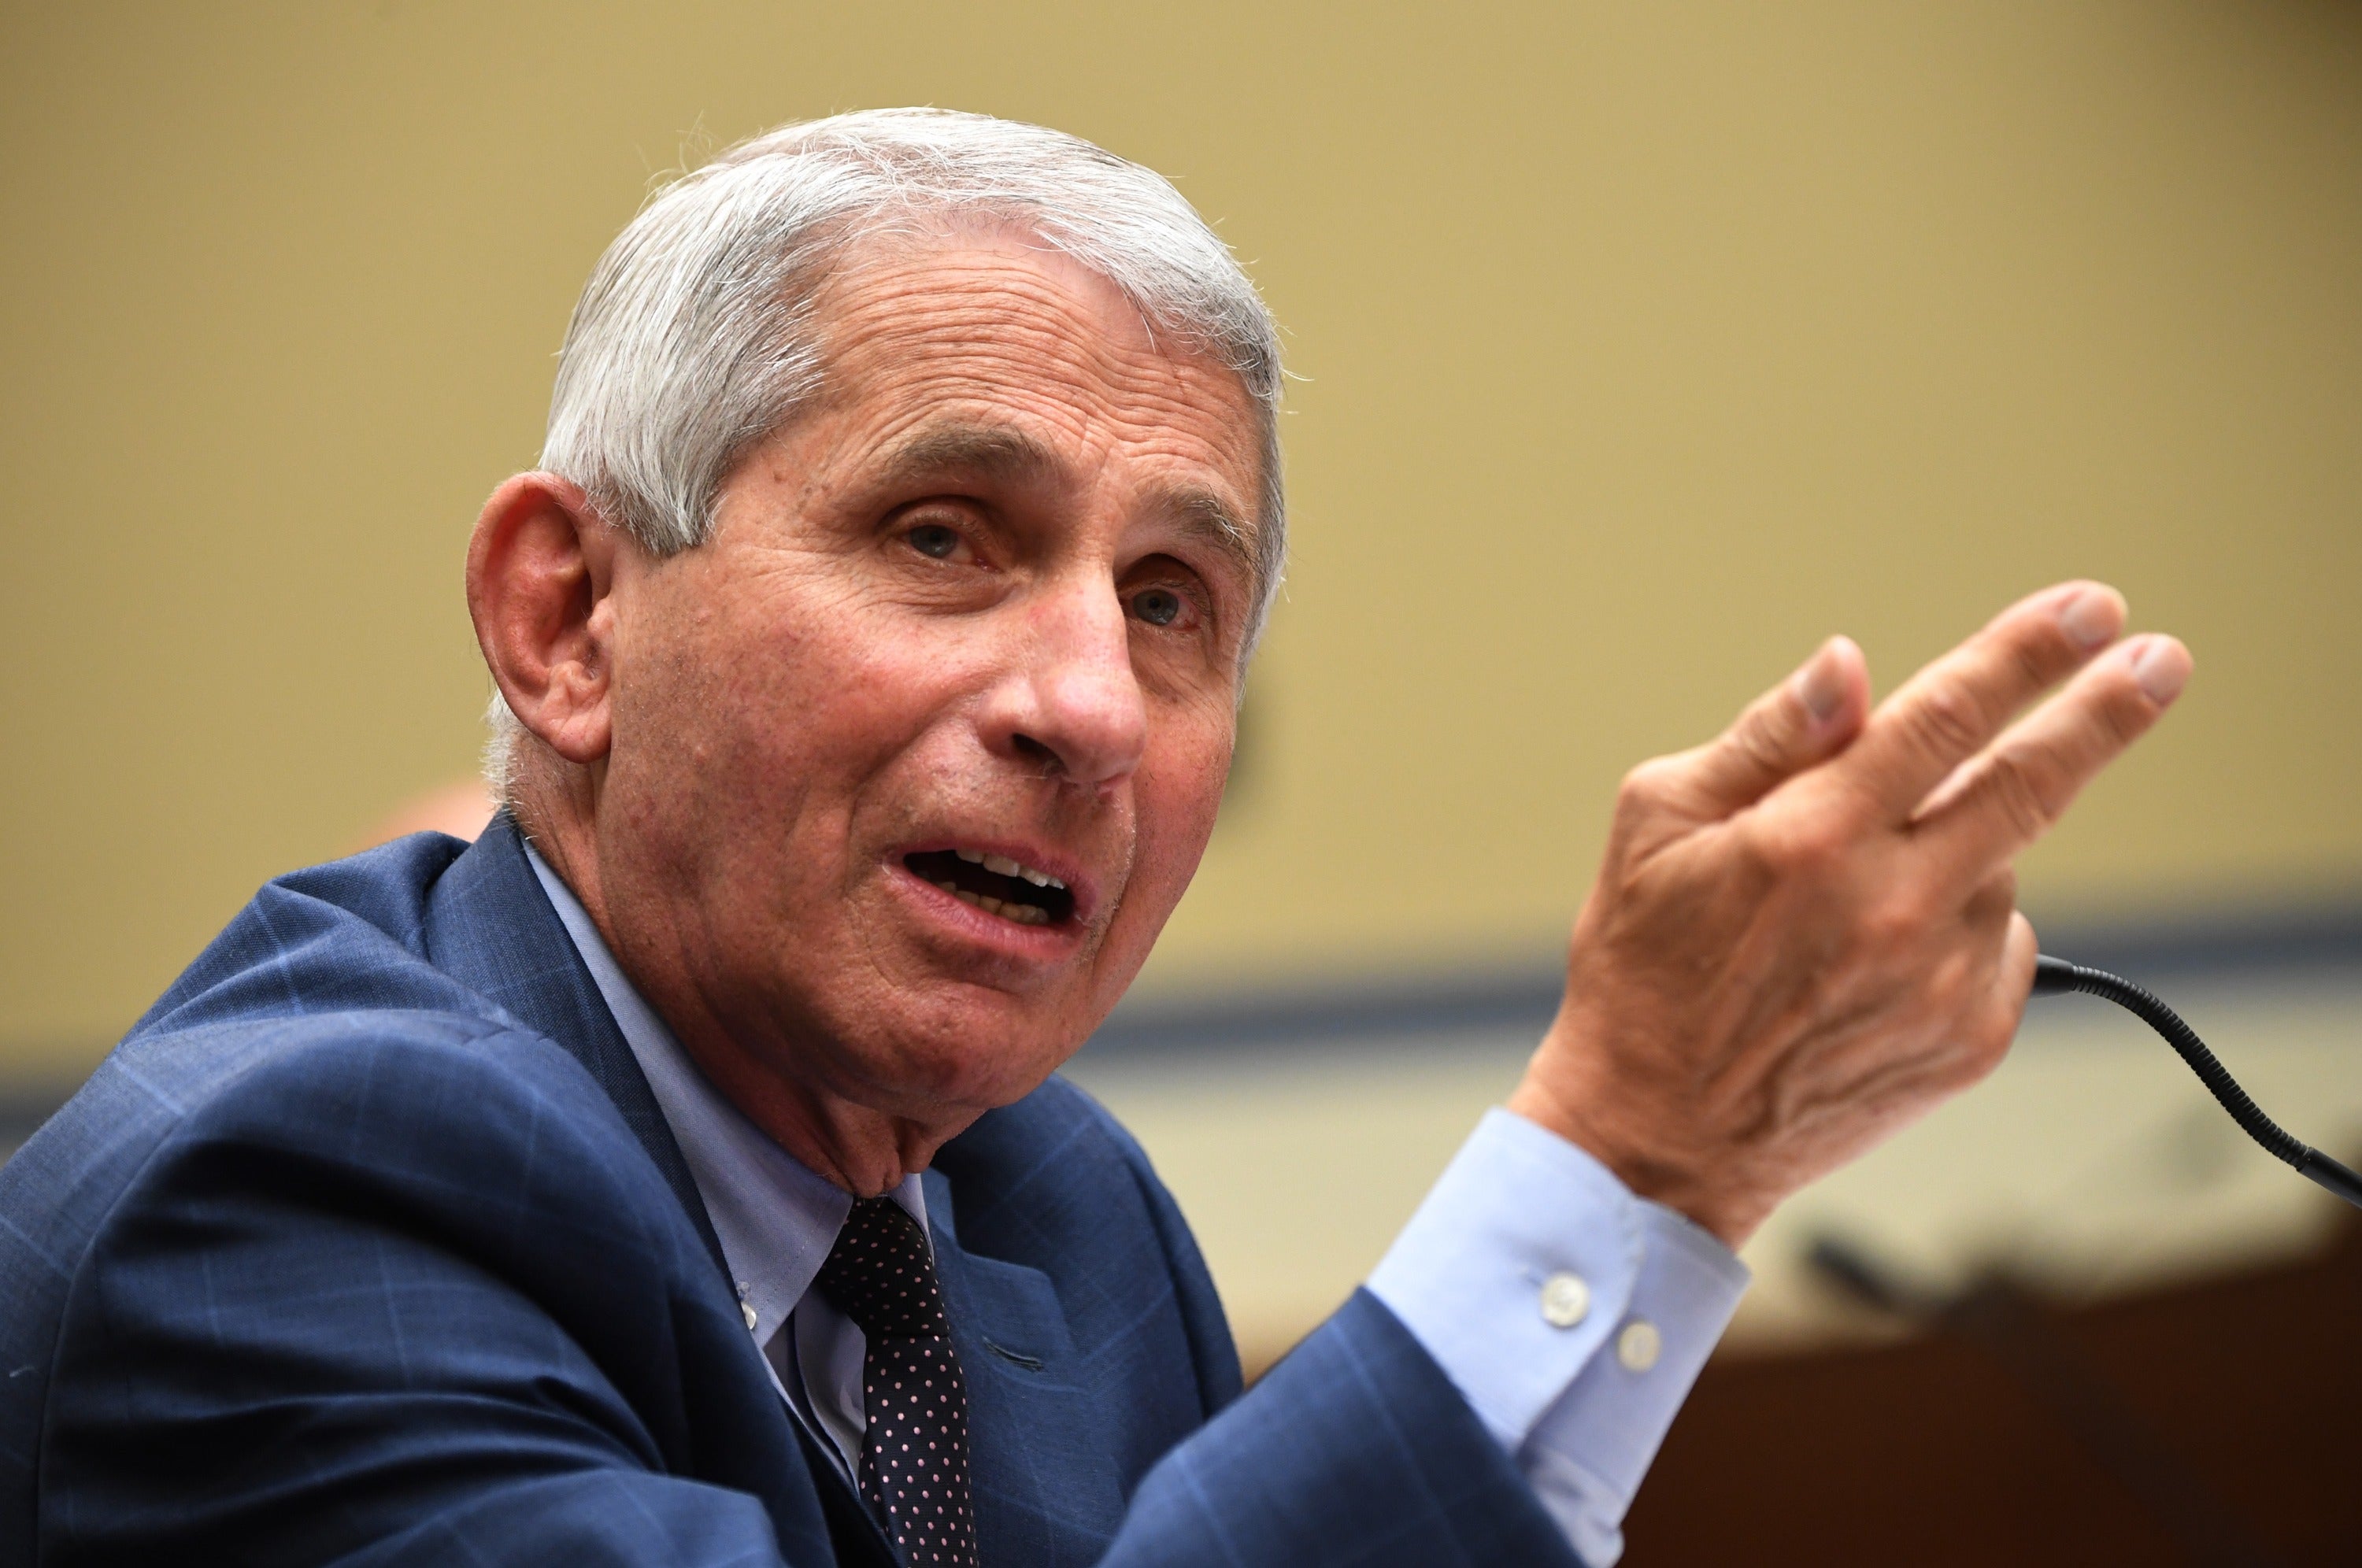 Dr Anthony Fauci, head of the National Institute of Allergy and Infectious Diseases, has found his approval rating rise during the pandemic